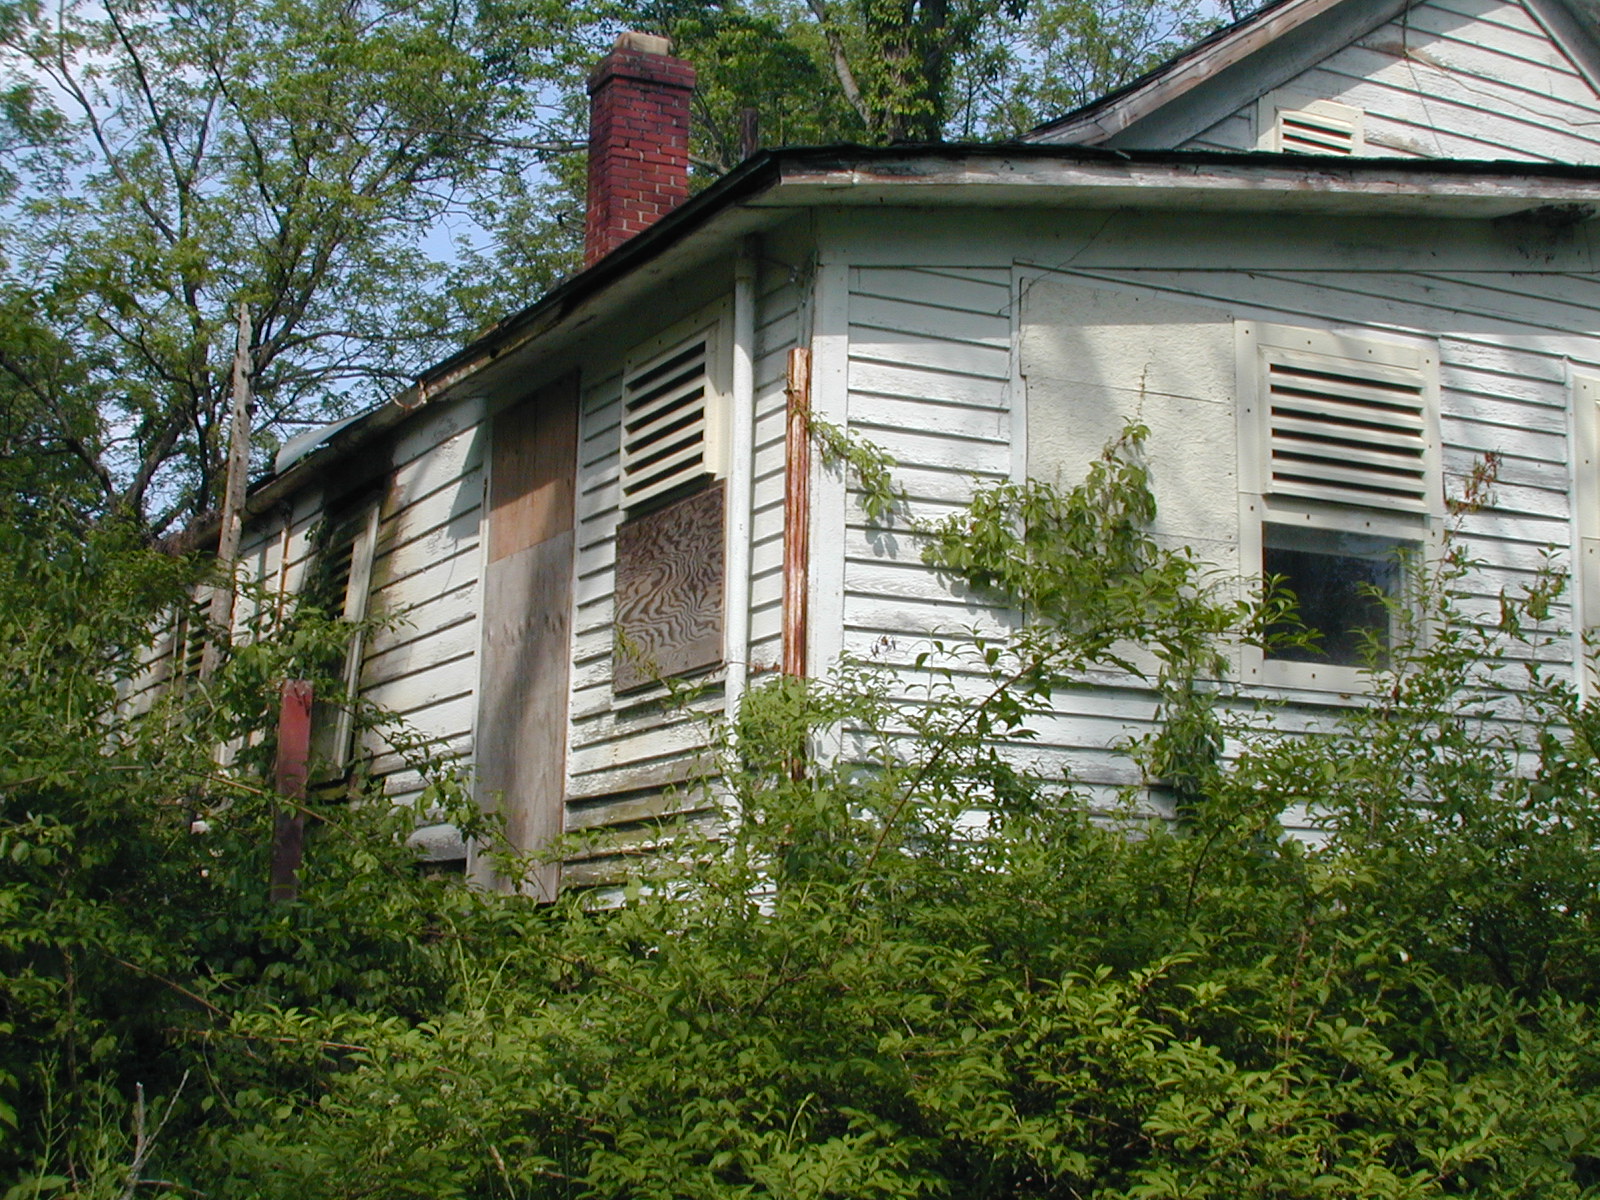 Second unknown house